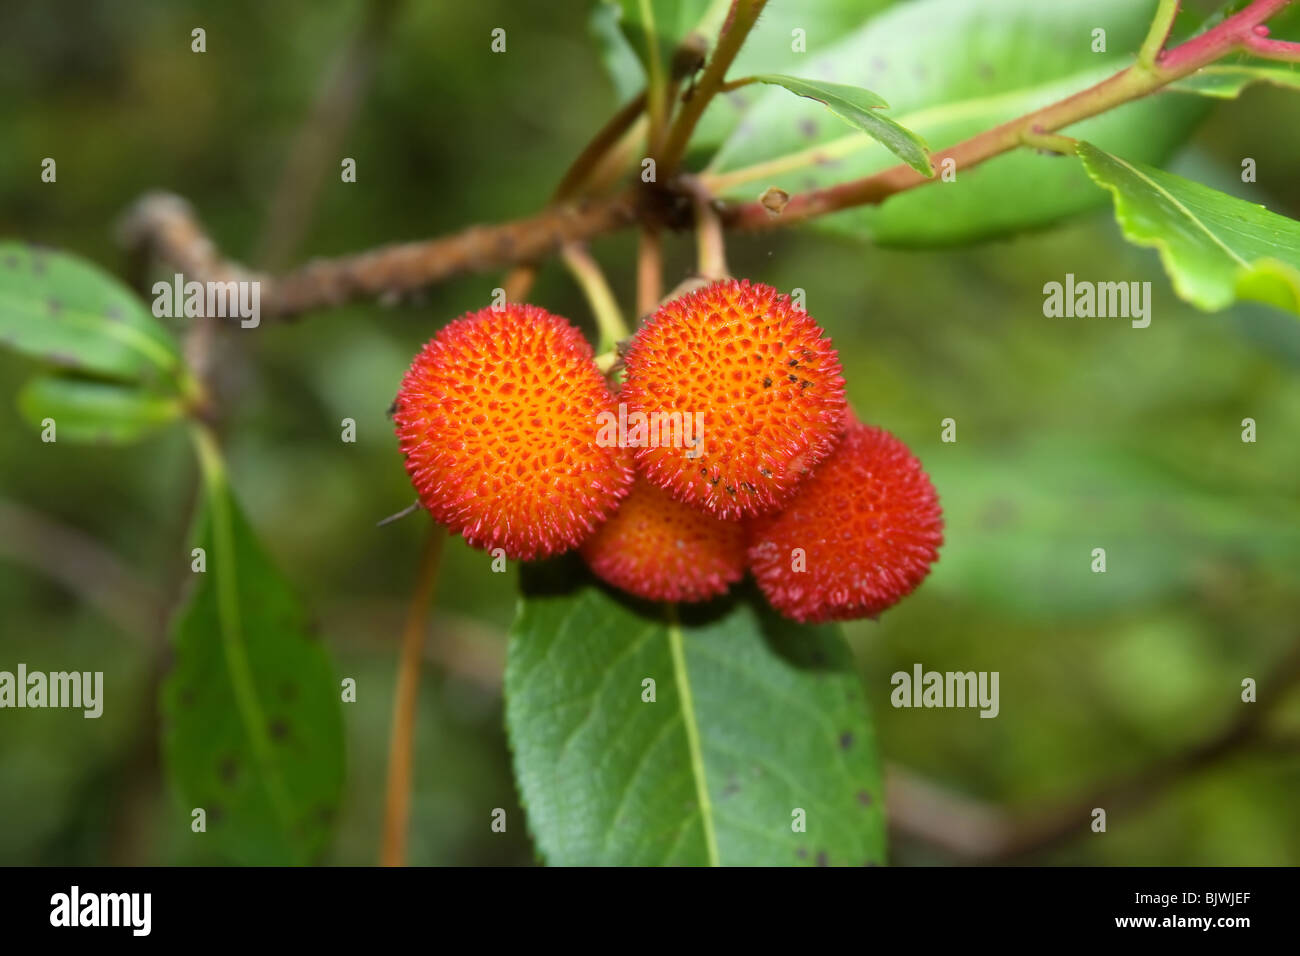 Arbutus unedo is an evergreen plant typical of the Mediterranean region. The fruit is a red aggregate drupe with a rough surface Stock Photo